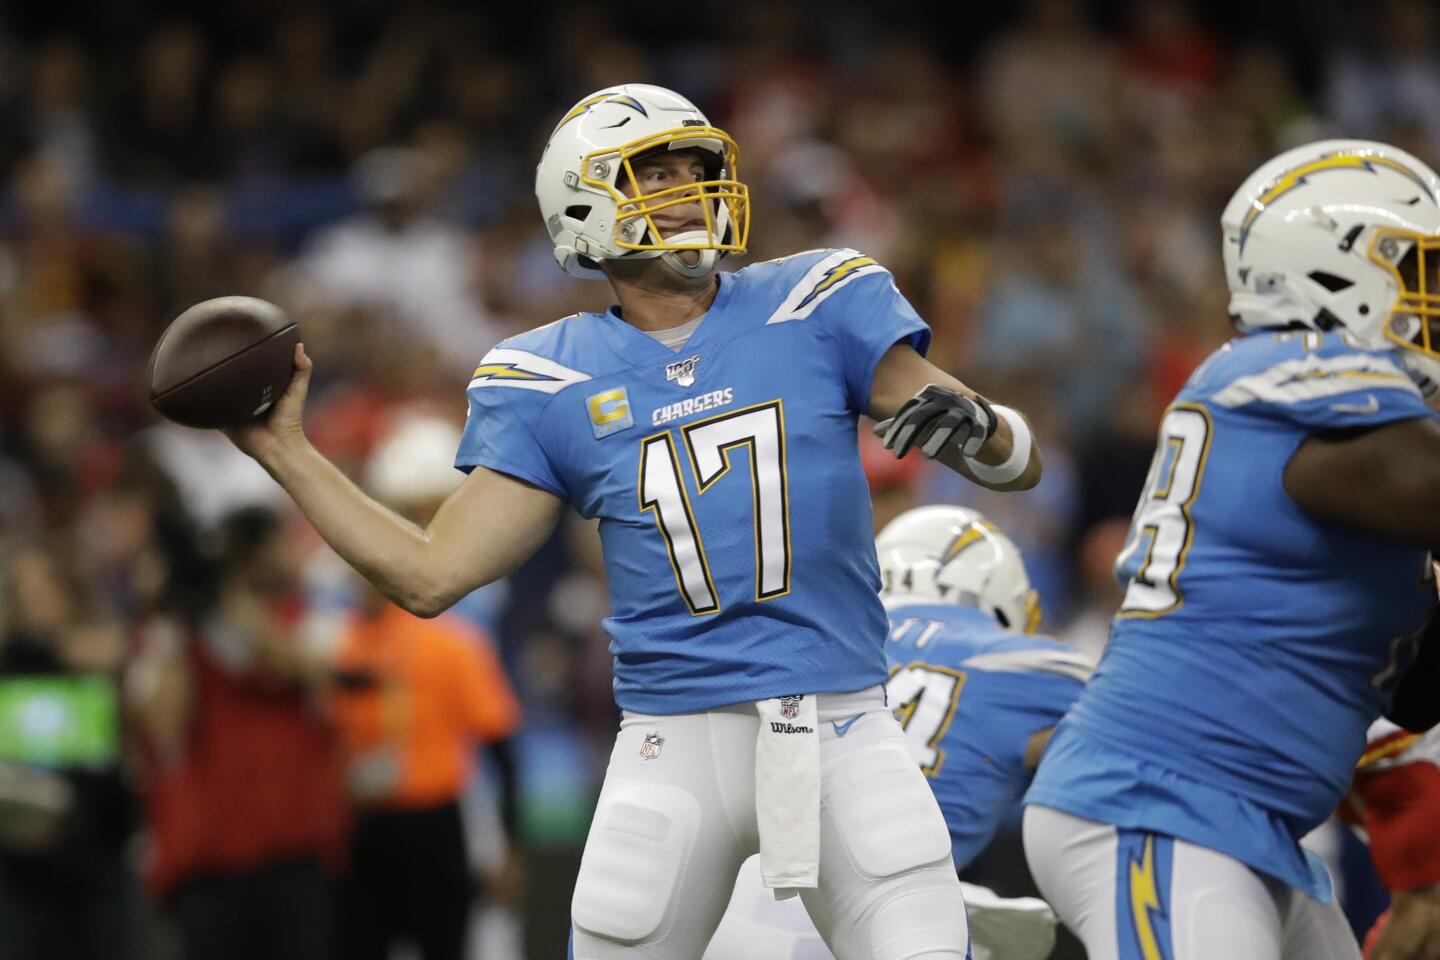 Chargers quarterback Philip Rivers throws a pass during the first half of a game against the Chiefs on Nov. 18.